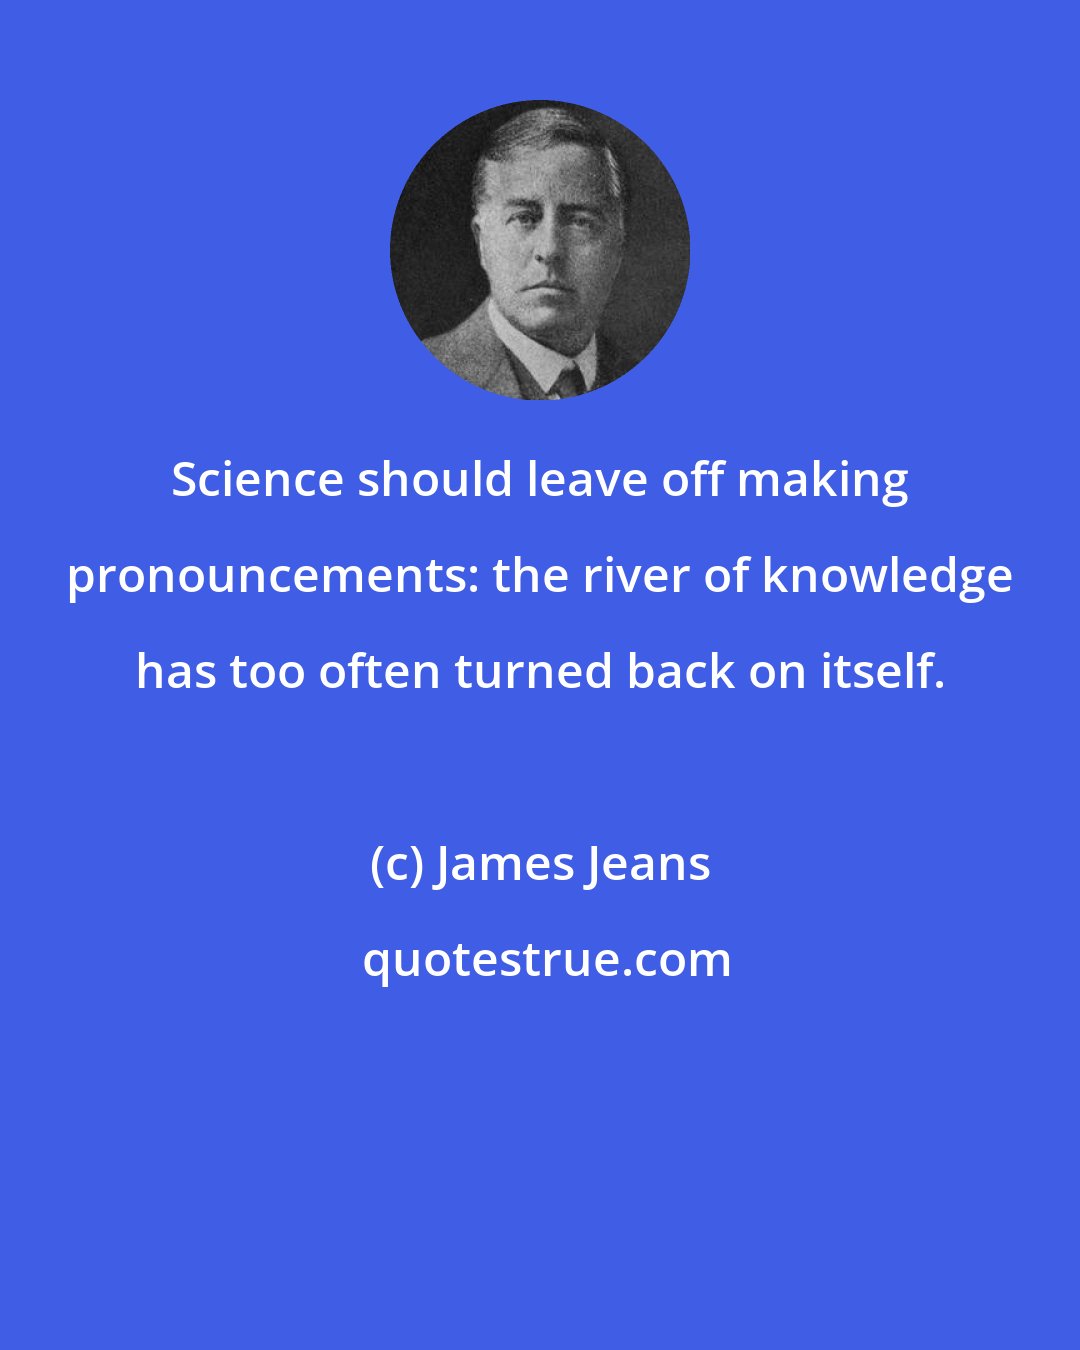 James Jeans: Science should leave off making pronouncements: the river of knowledge has too often turned back on itself.